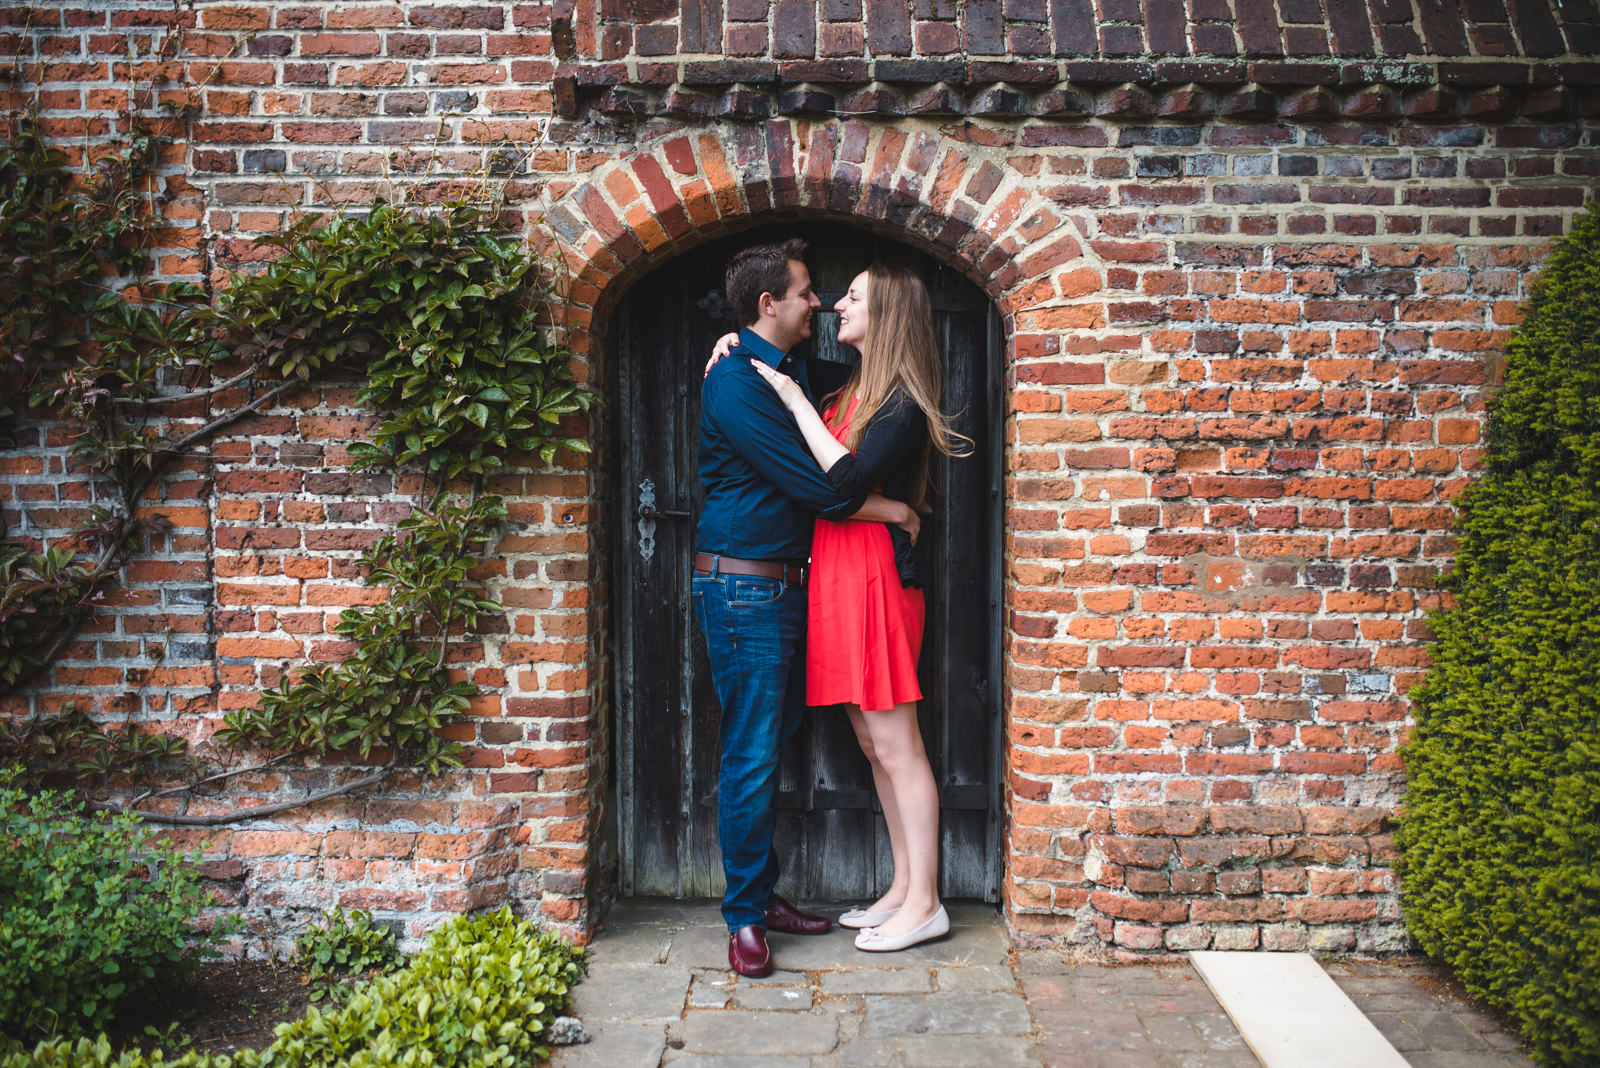 Engagement shoot at Great Fosters wedding venue in Surrey.